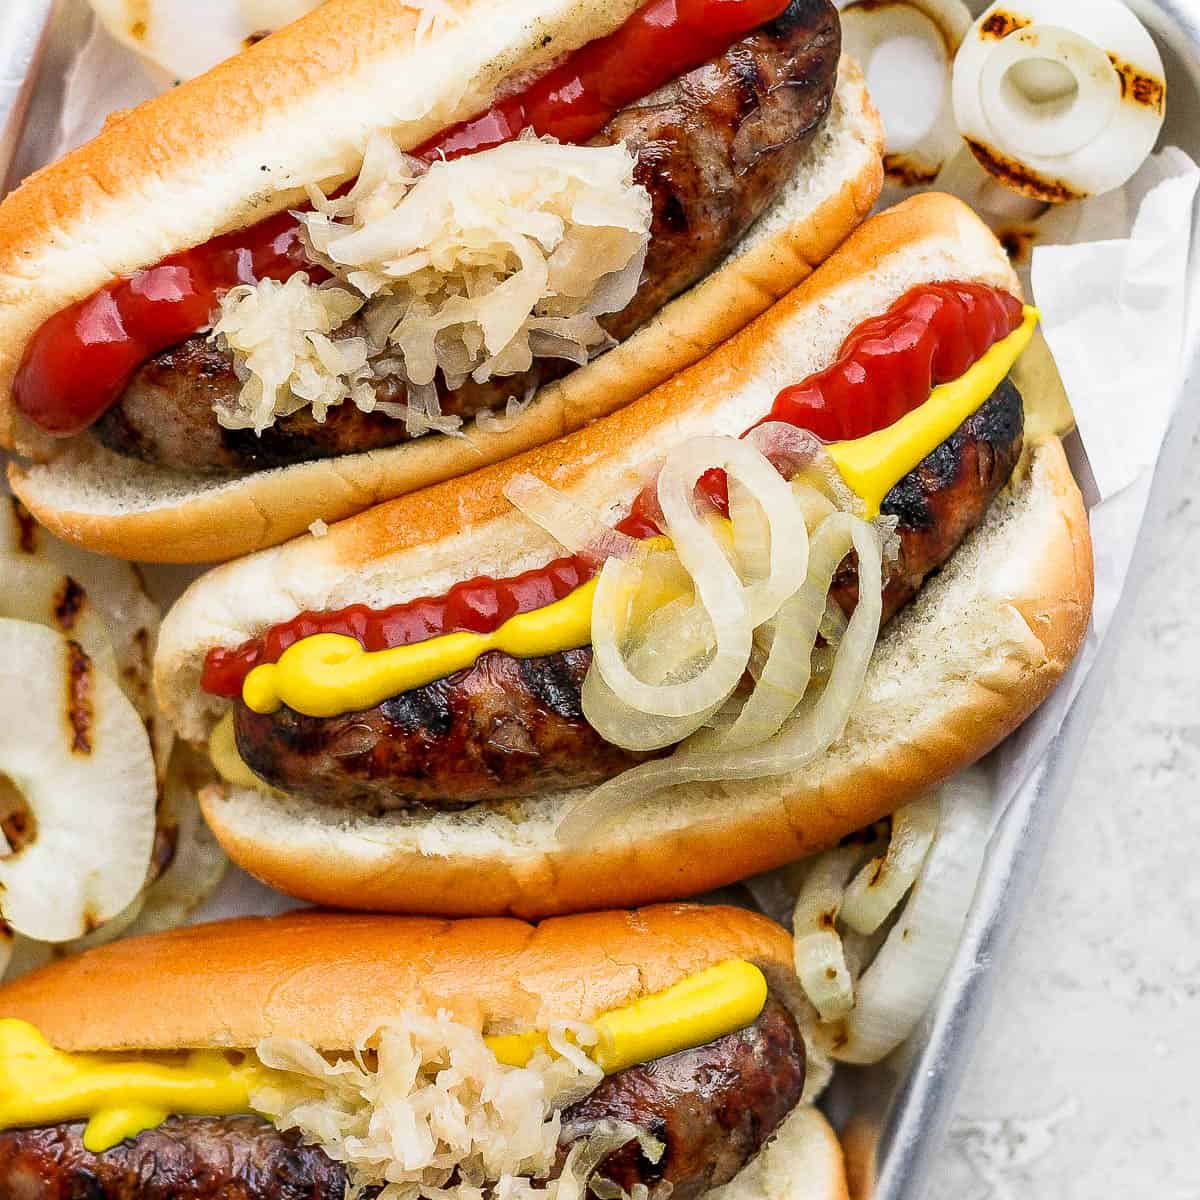 https://thewoodenskillet.com/wp-content/uploads/2023/05/how-to-grill-brats-recipe-2.jpg